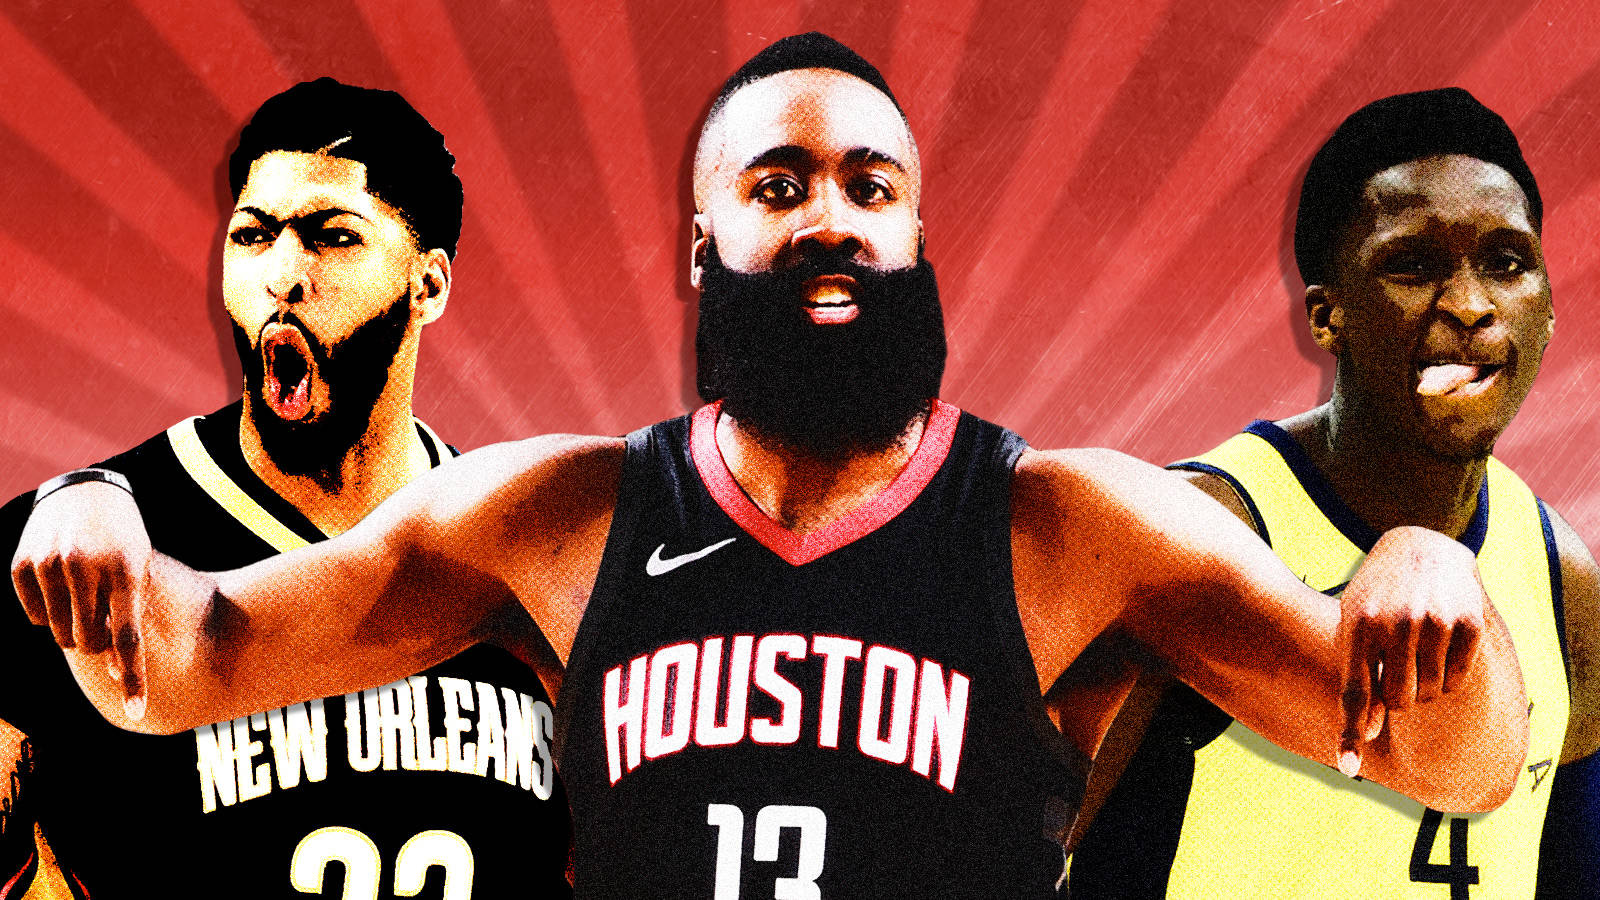 The 'Most points scored in an NBA playoff opener' quiz